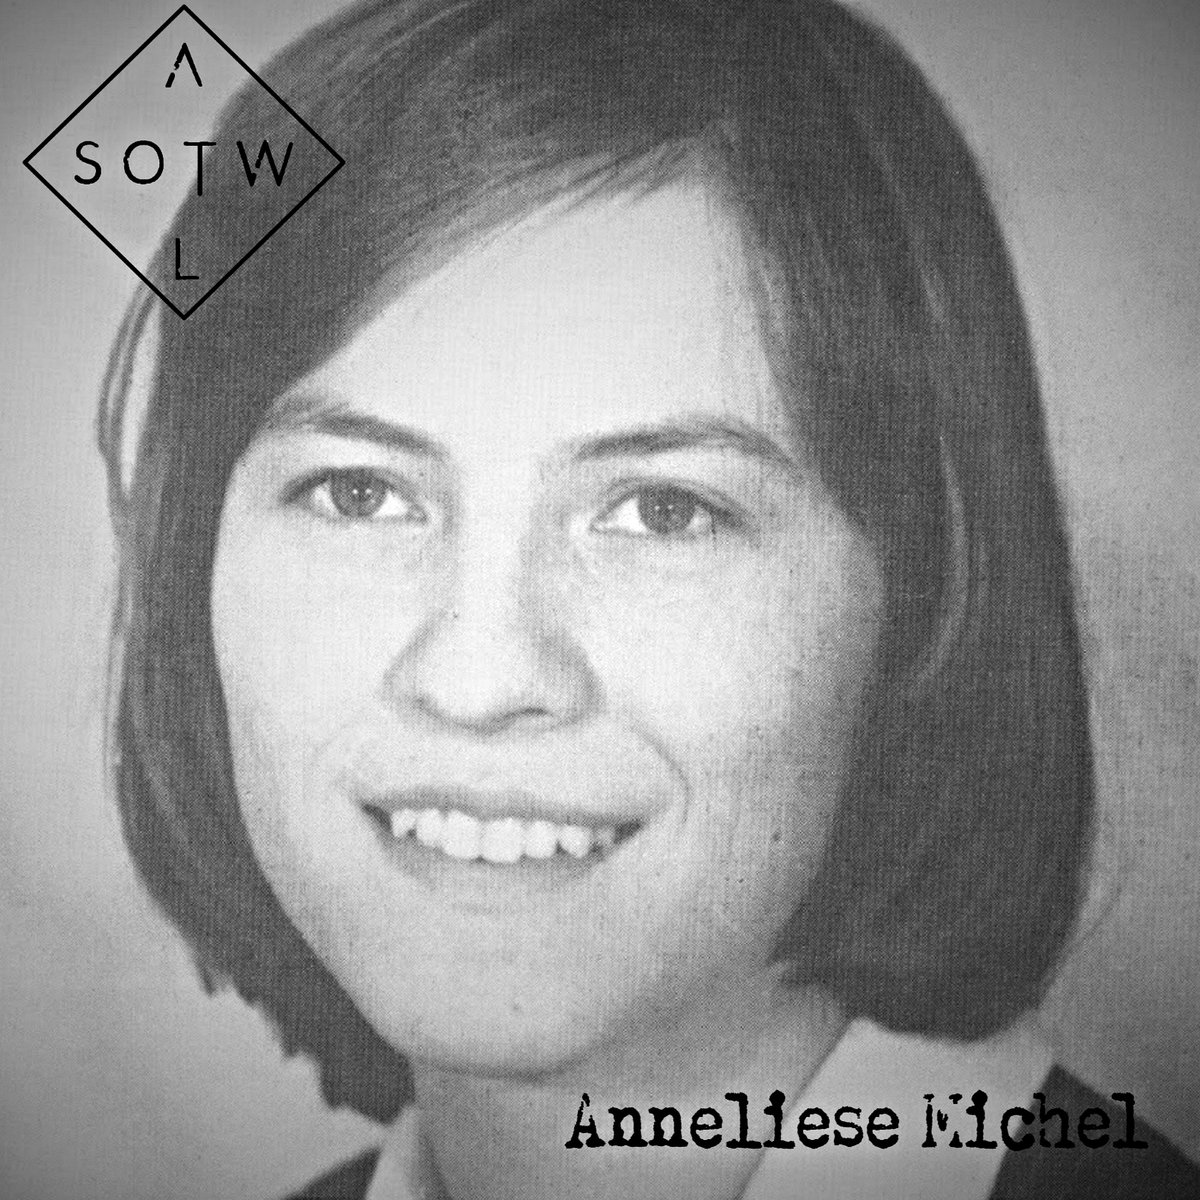 All Signs Of Those Who Left – Anneliese Michel